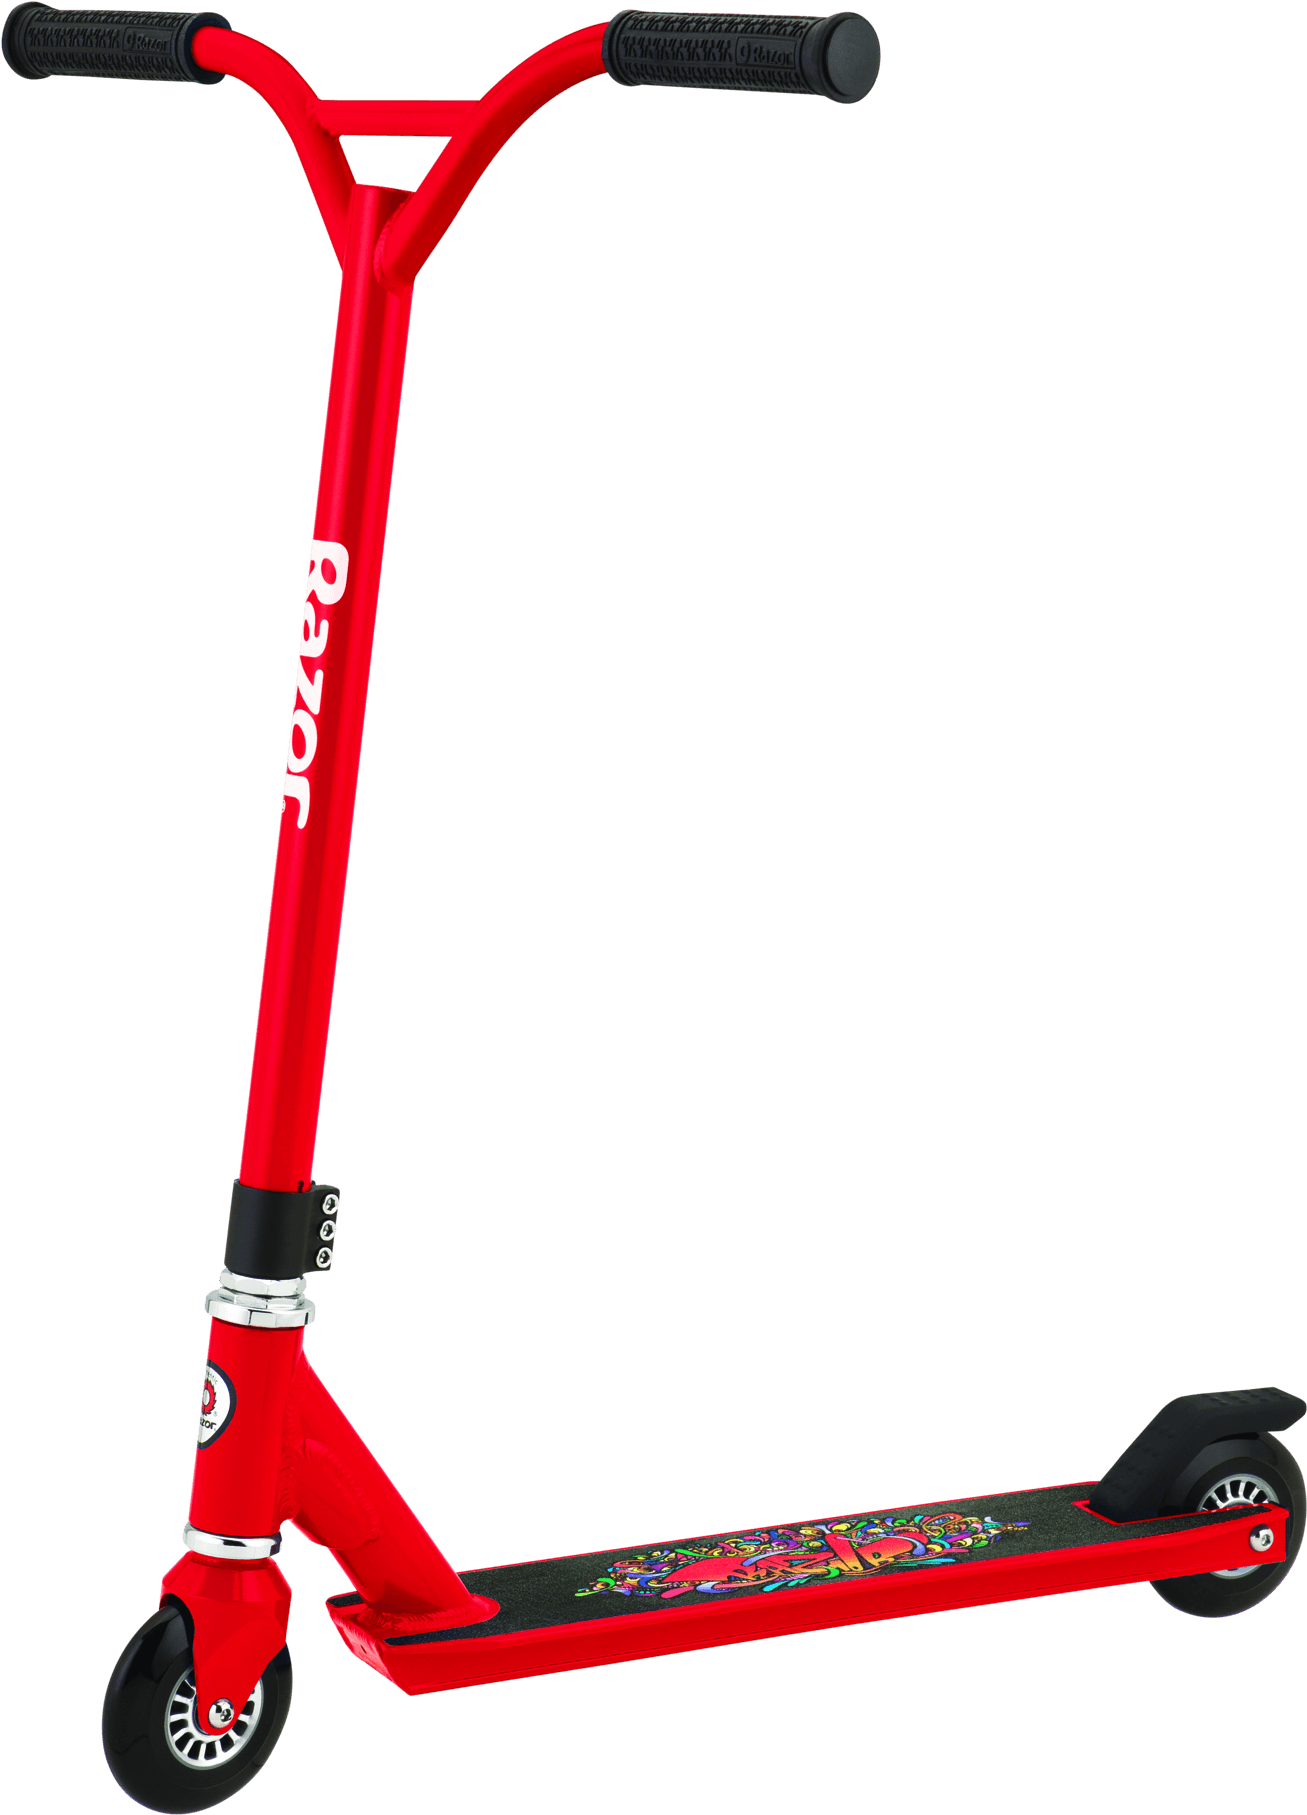 Kick Scooter PNG Background